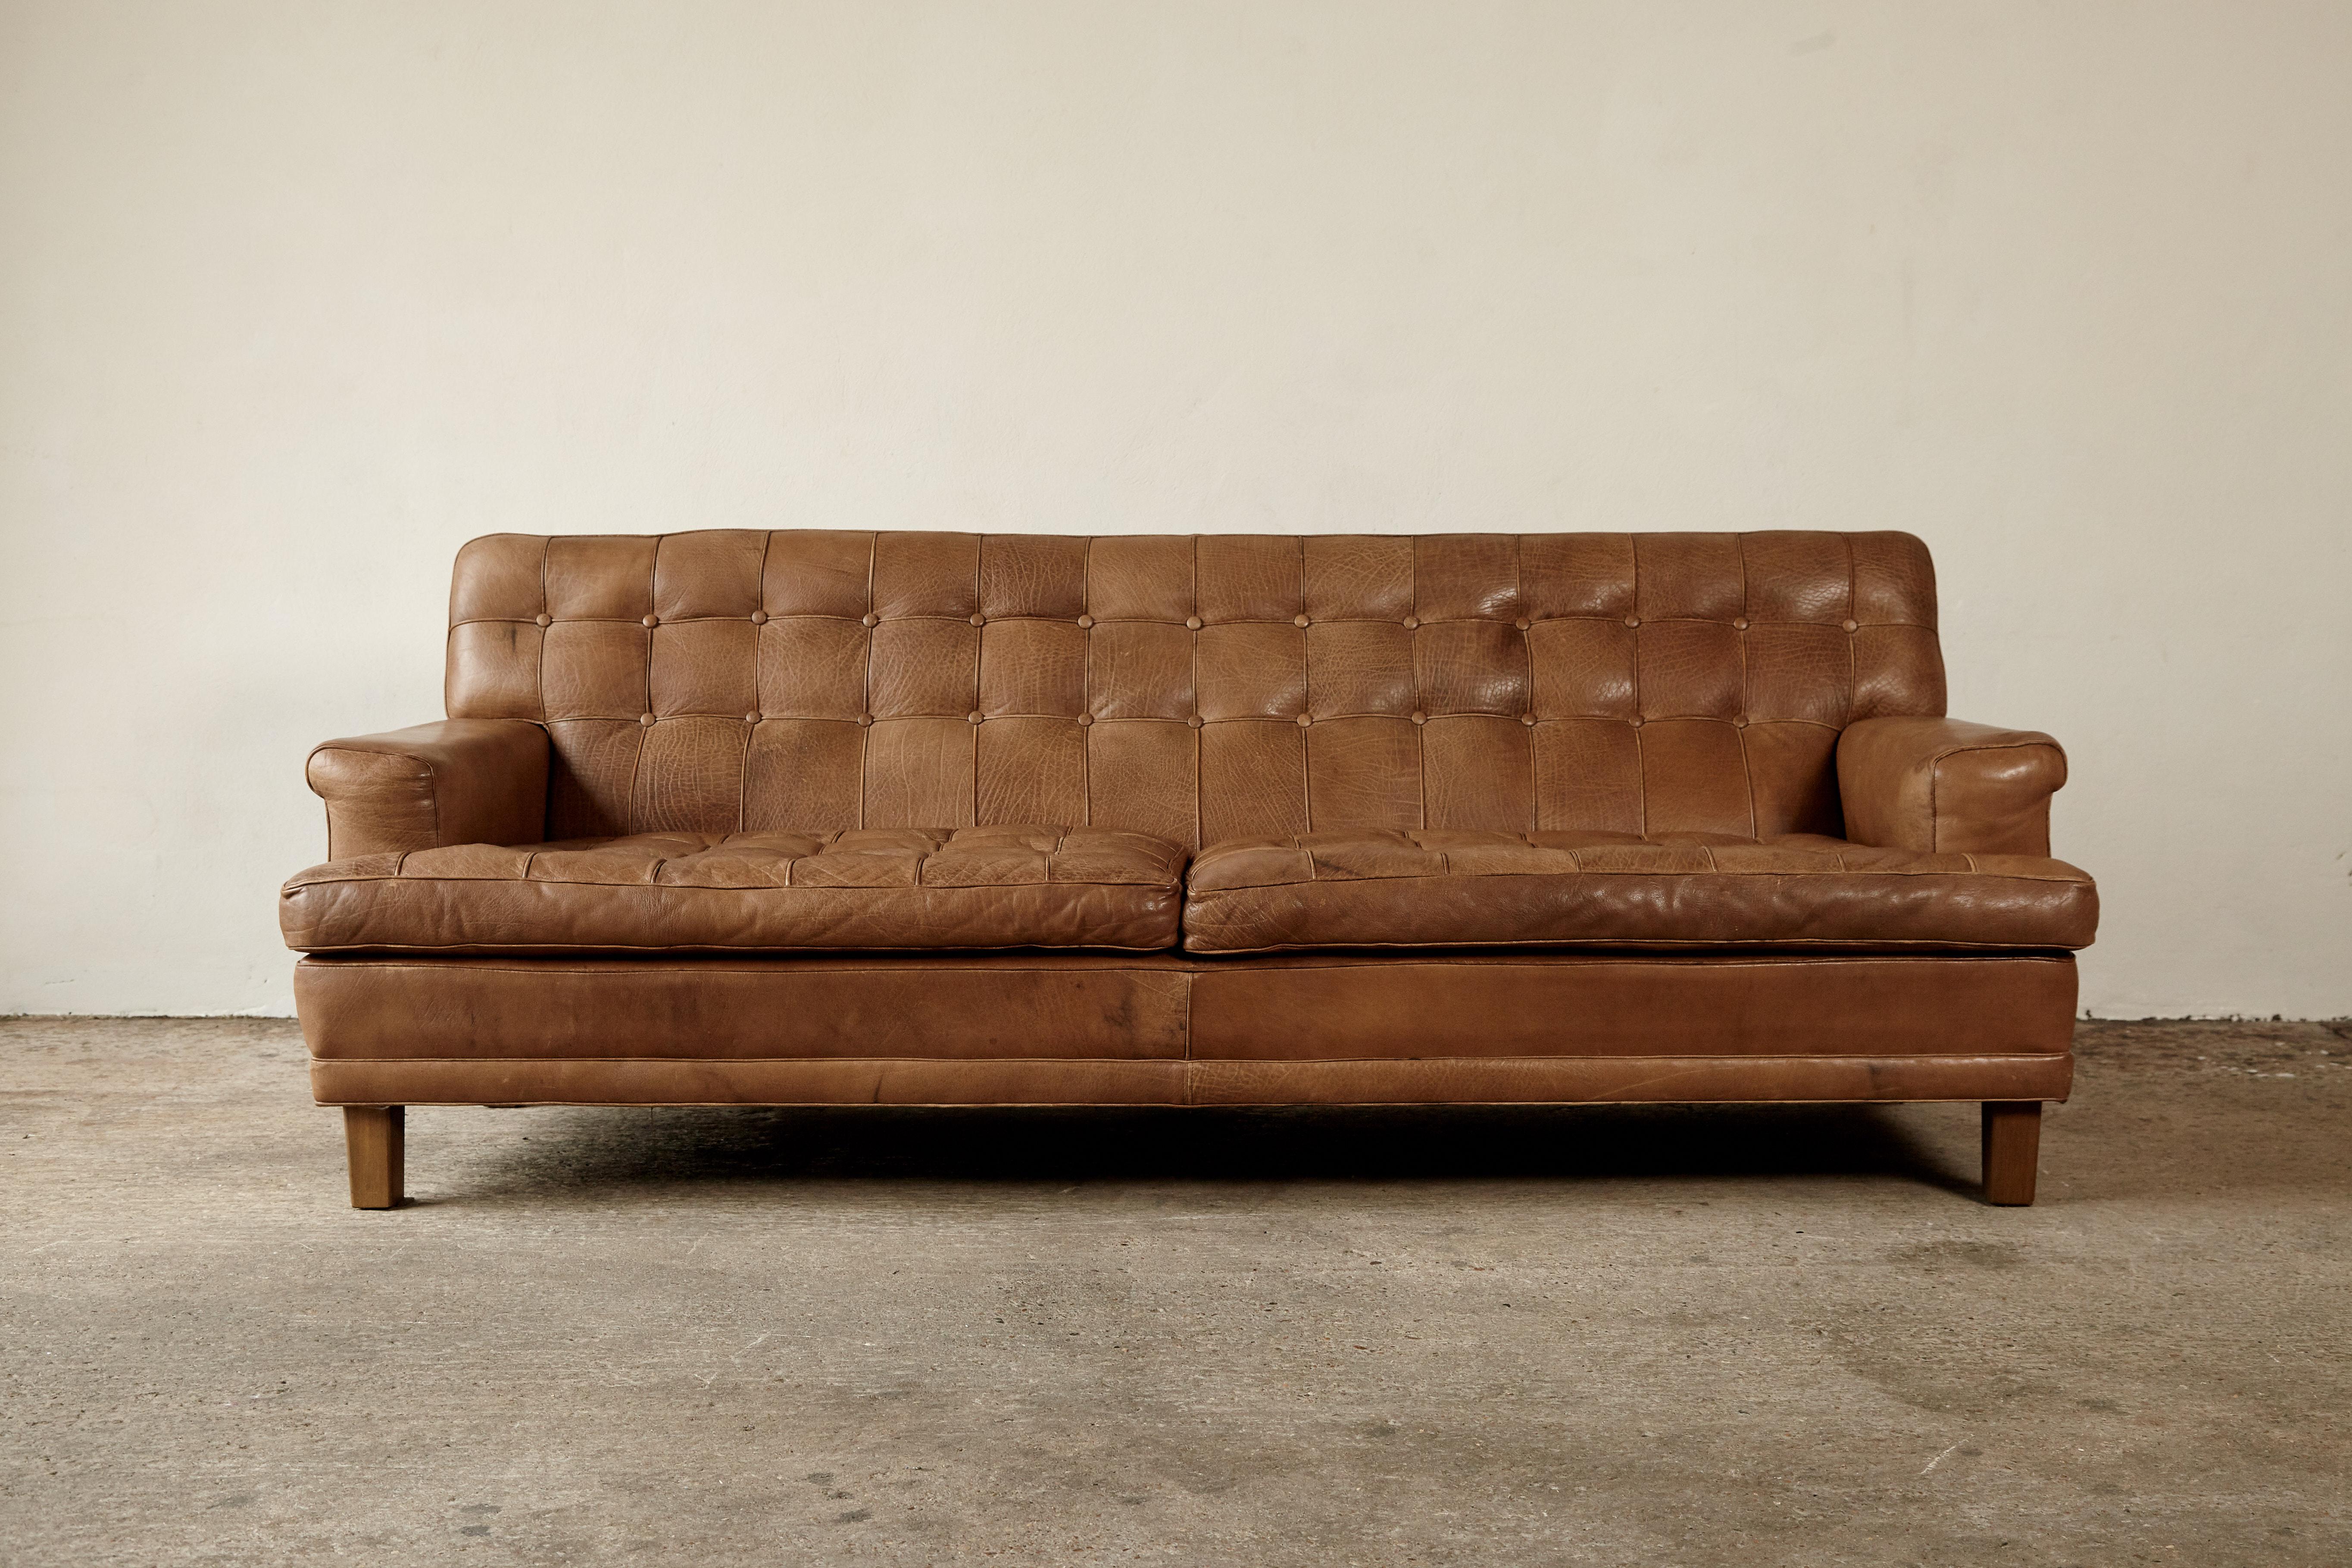 Stunning Arne Norell leather Merkur / Mexico sofa, Sweden, Norell Mobel, 1970s in cognac colored buffalo leather.    Lovely vintage condition with a wonderful patina and tone.   Ships worldwide - please contact us for options.